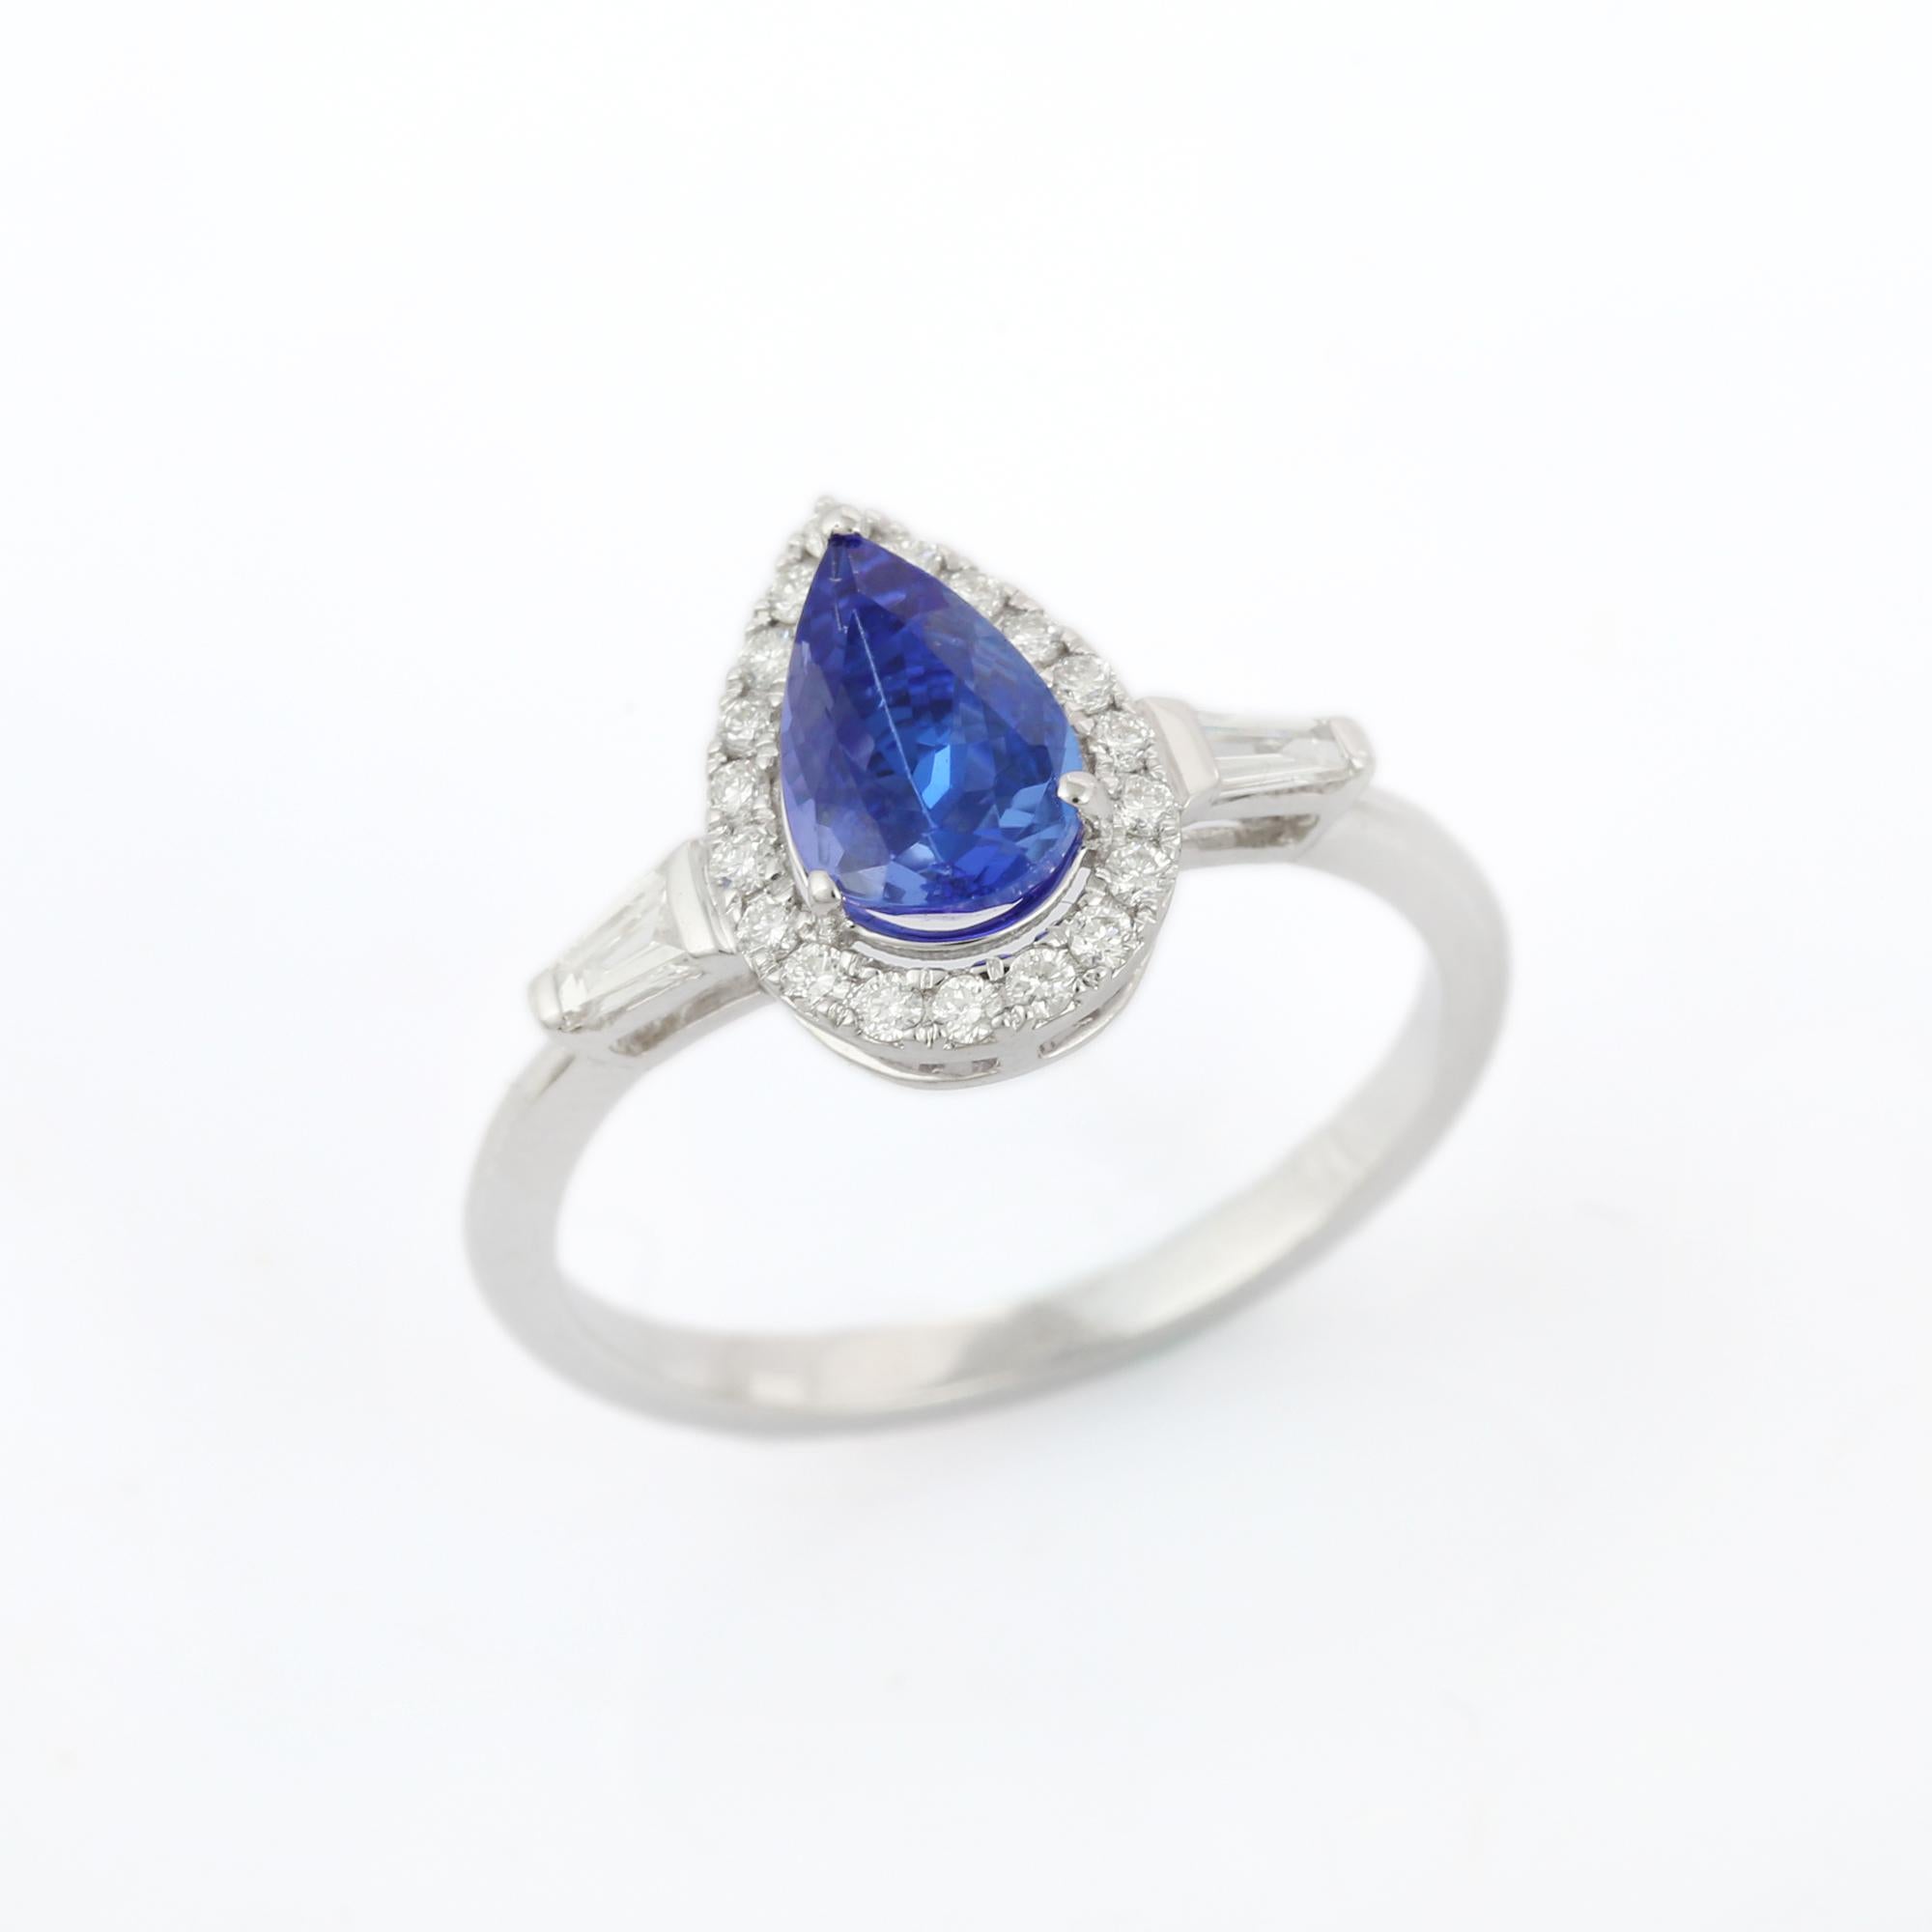 For Sale:  1.1 CTW Pear Shaped Tanzanite and Diamond Ring in 18k Solid White Gold 4